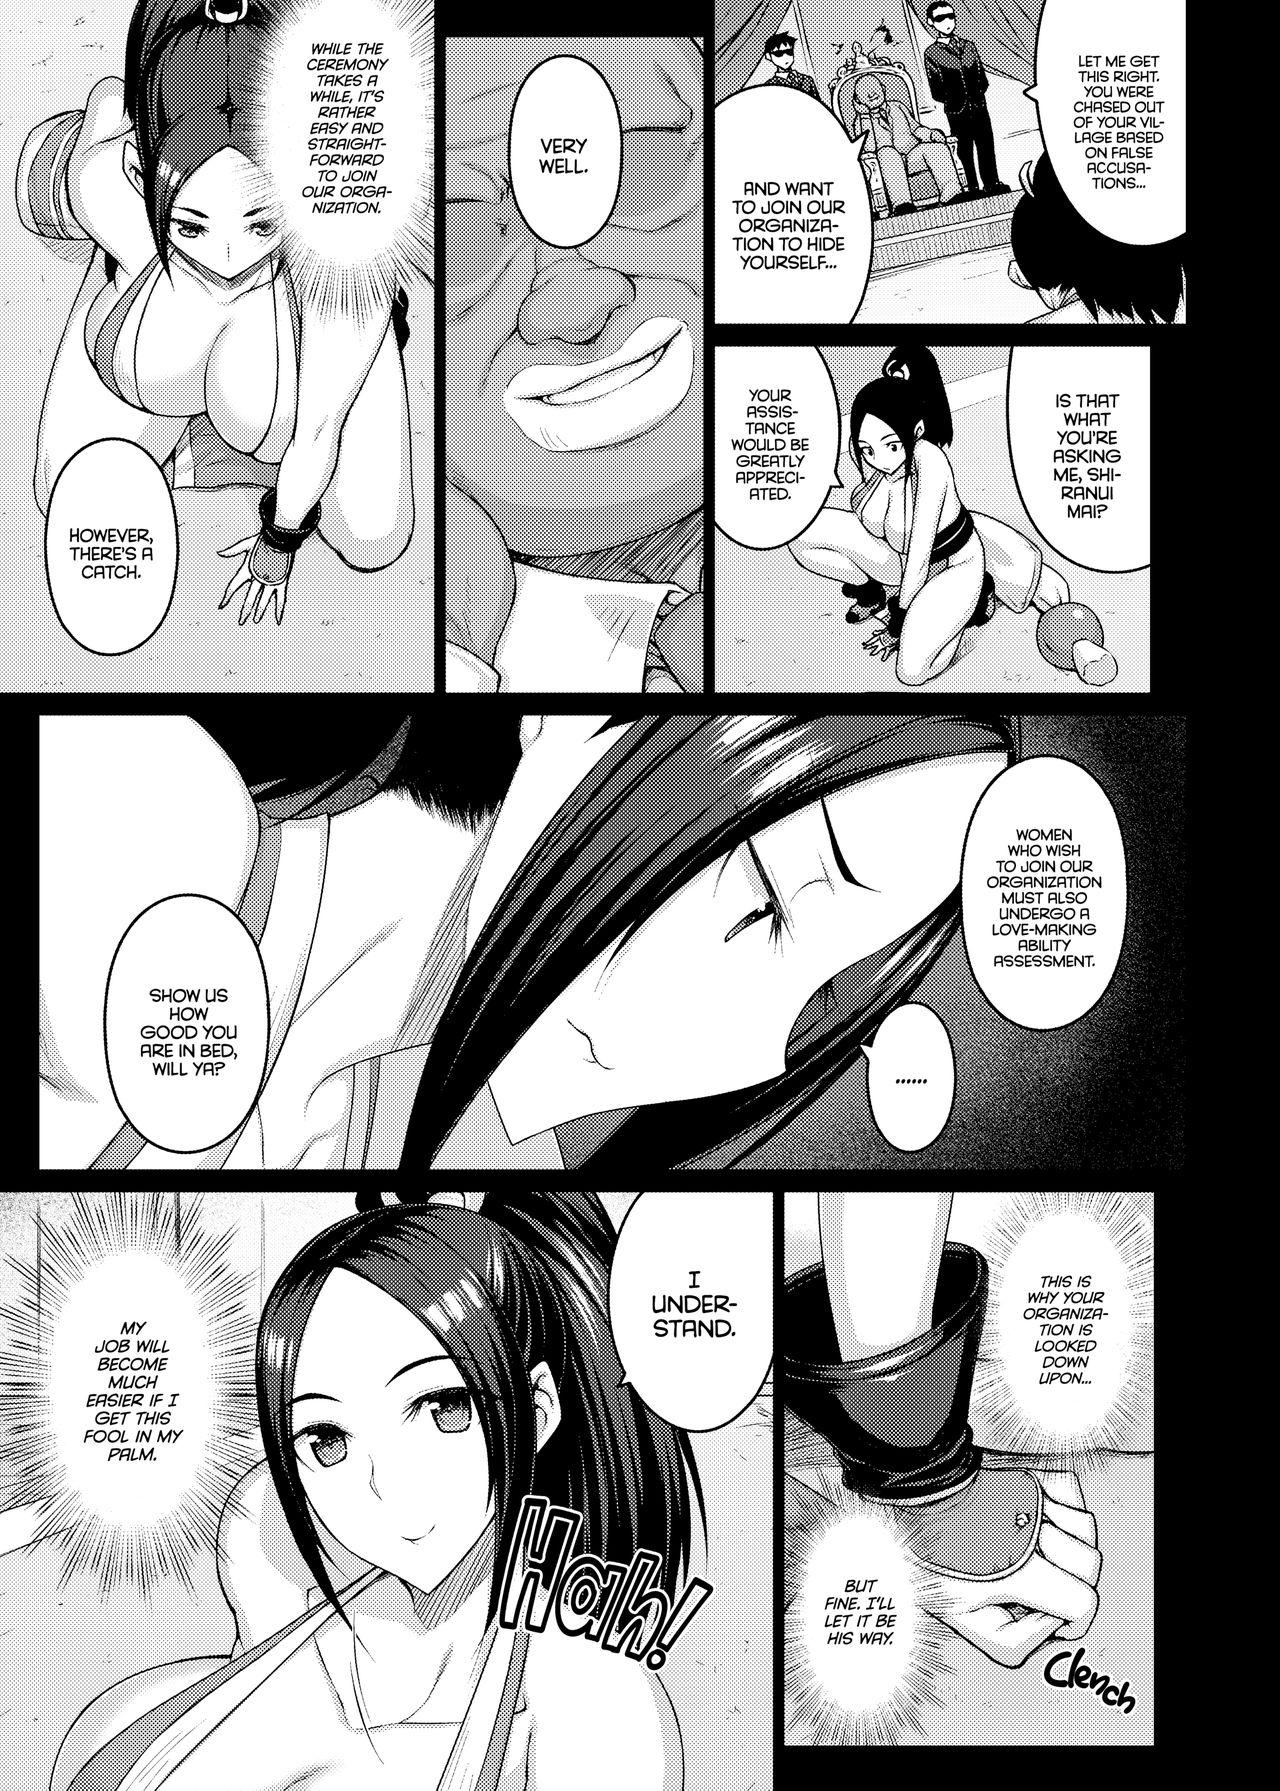 Free Rough Sex Porn Daraku no hana - King of fighters Missionary Position Porn - Page 6